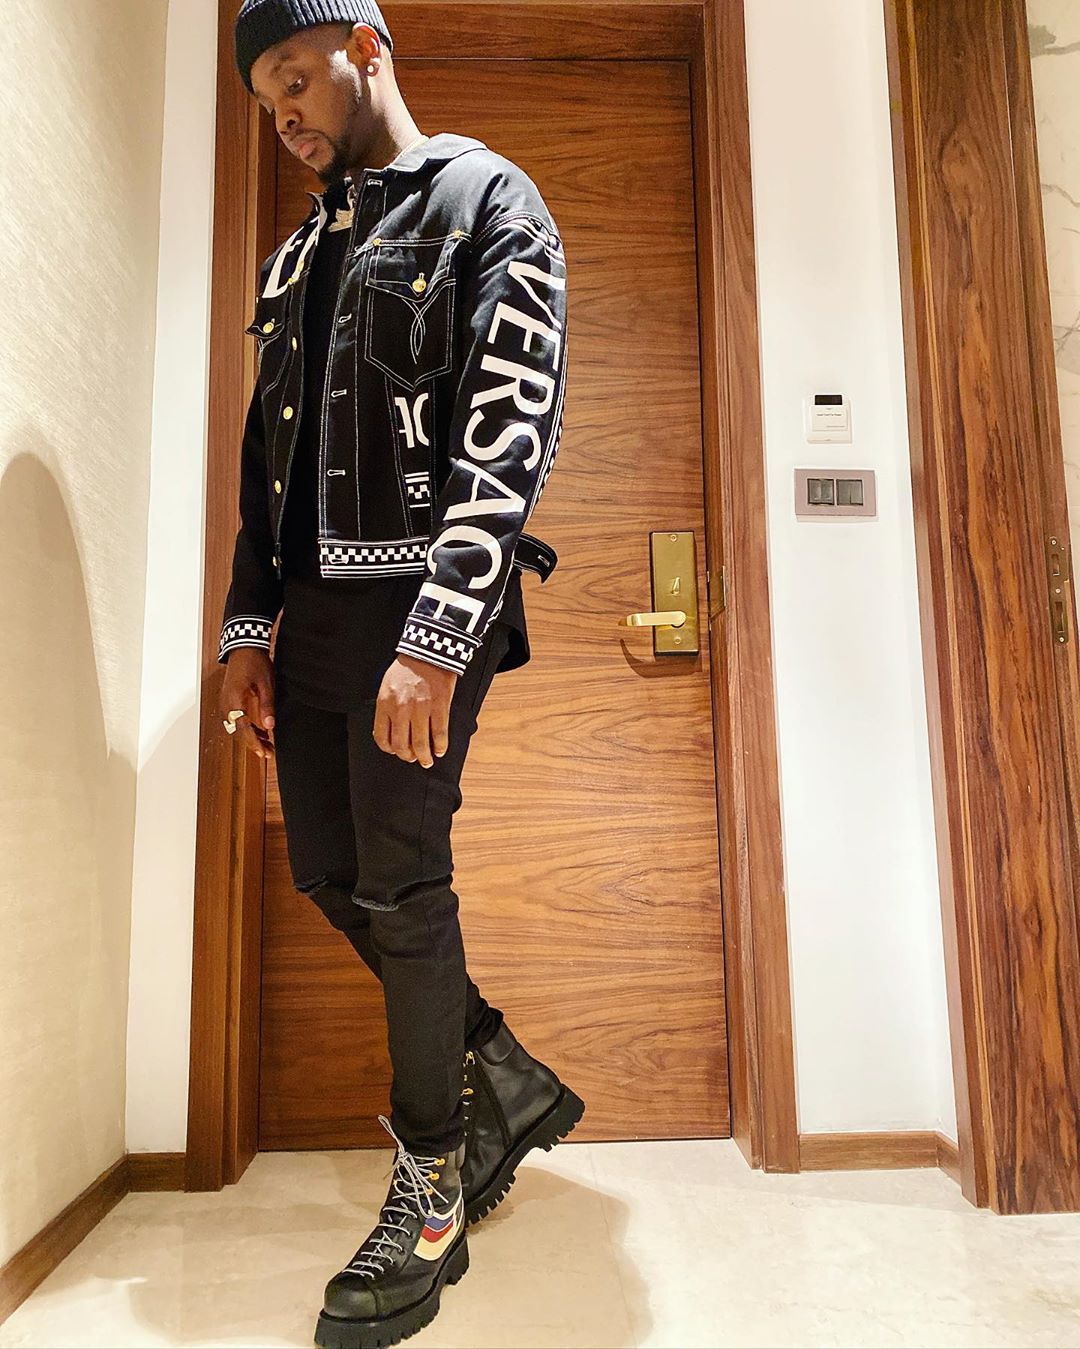 hottest-african-men-celebrities-style-fashion-style-rave